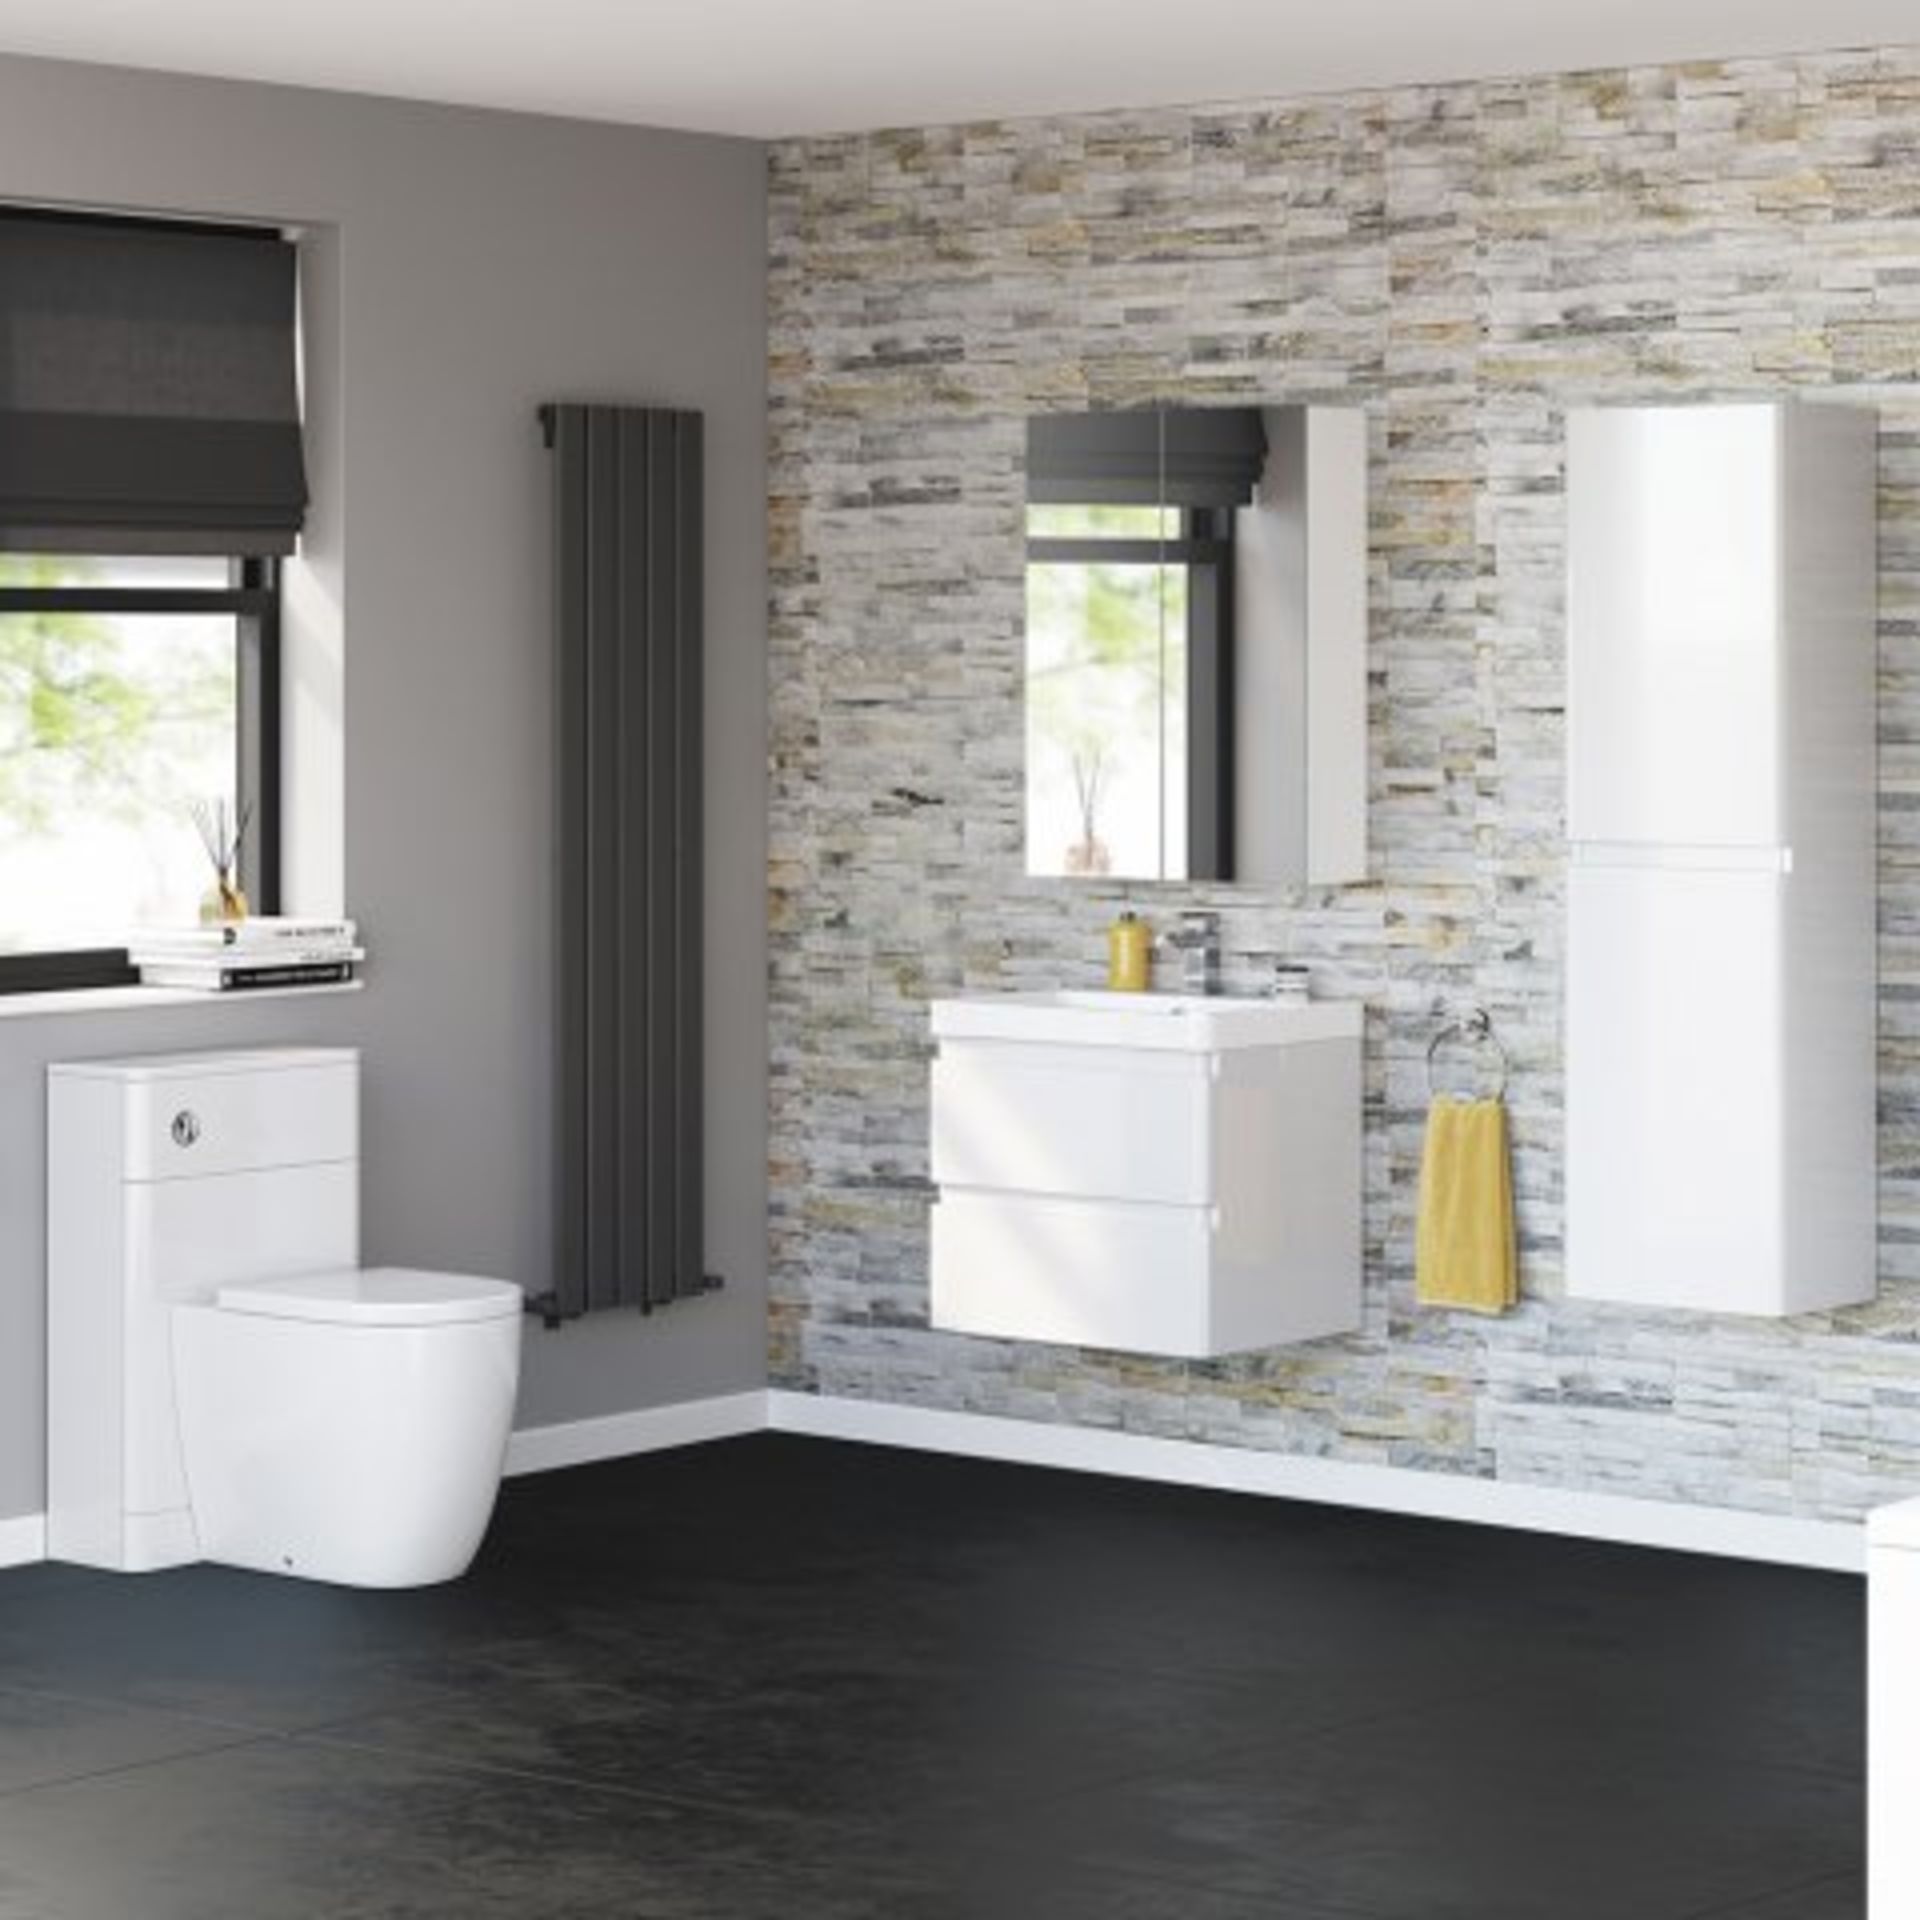 (REF49) 600mm Denver II Gloss White Built In Basin Drawer Unit - Wall Hung. RRP £499.99. WITH BASIN. - Image 3 of 3